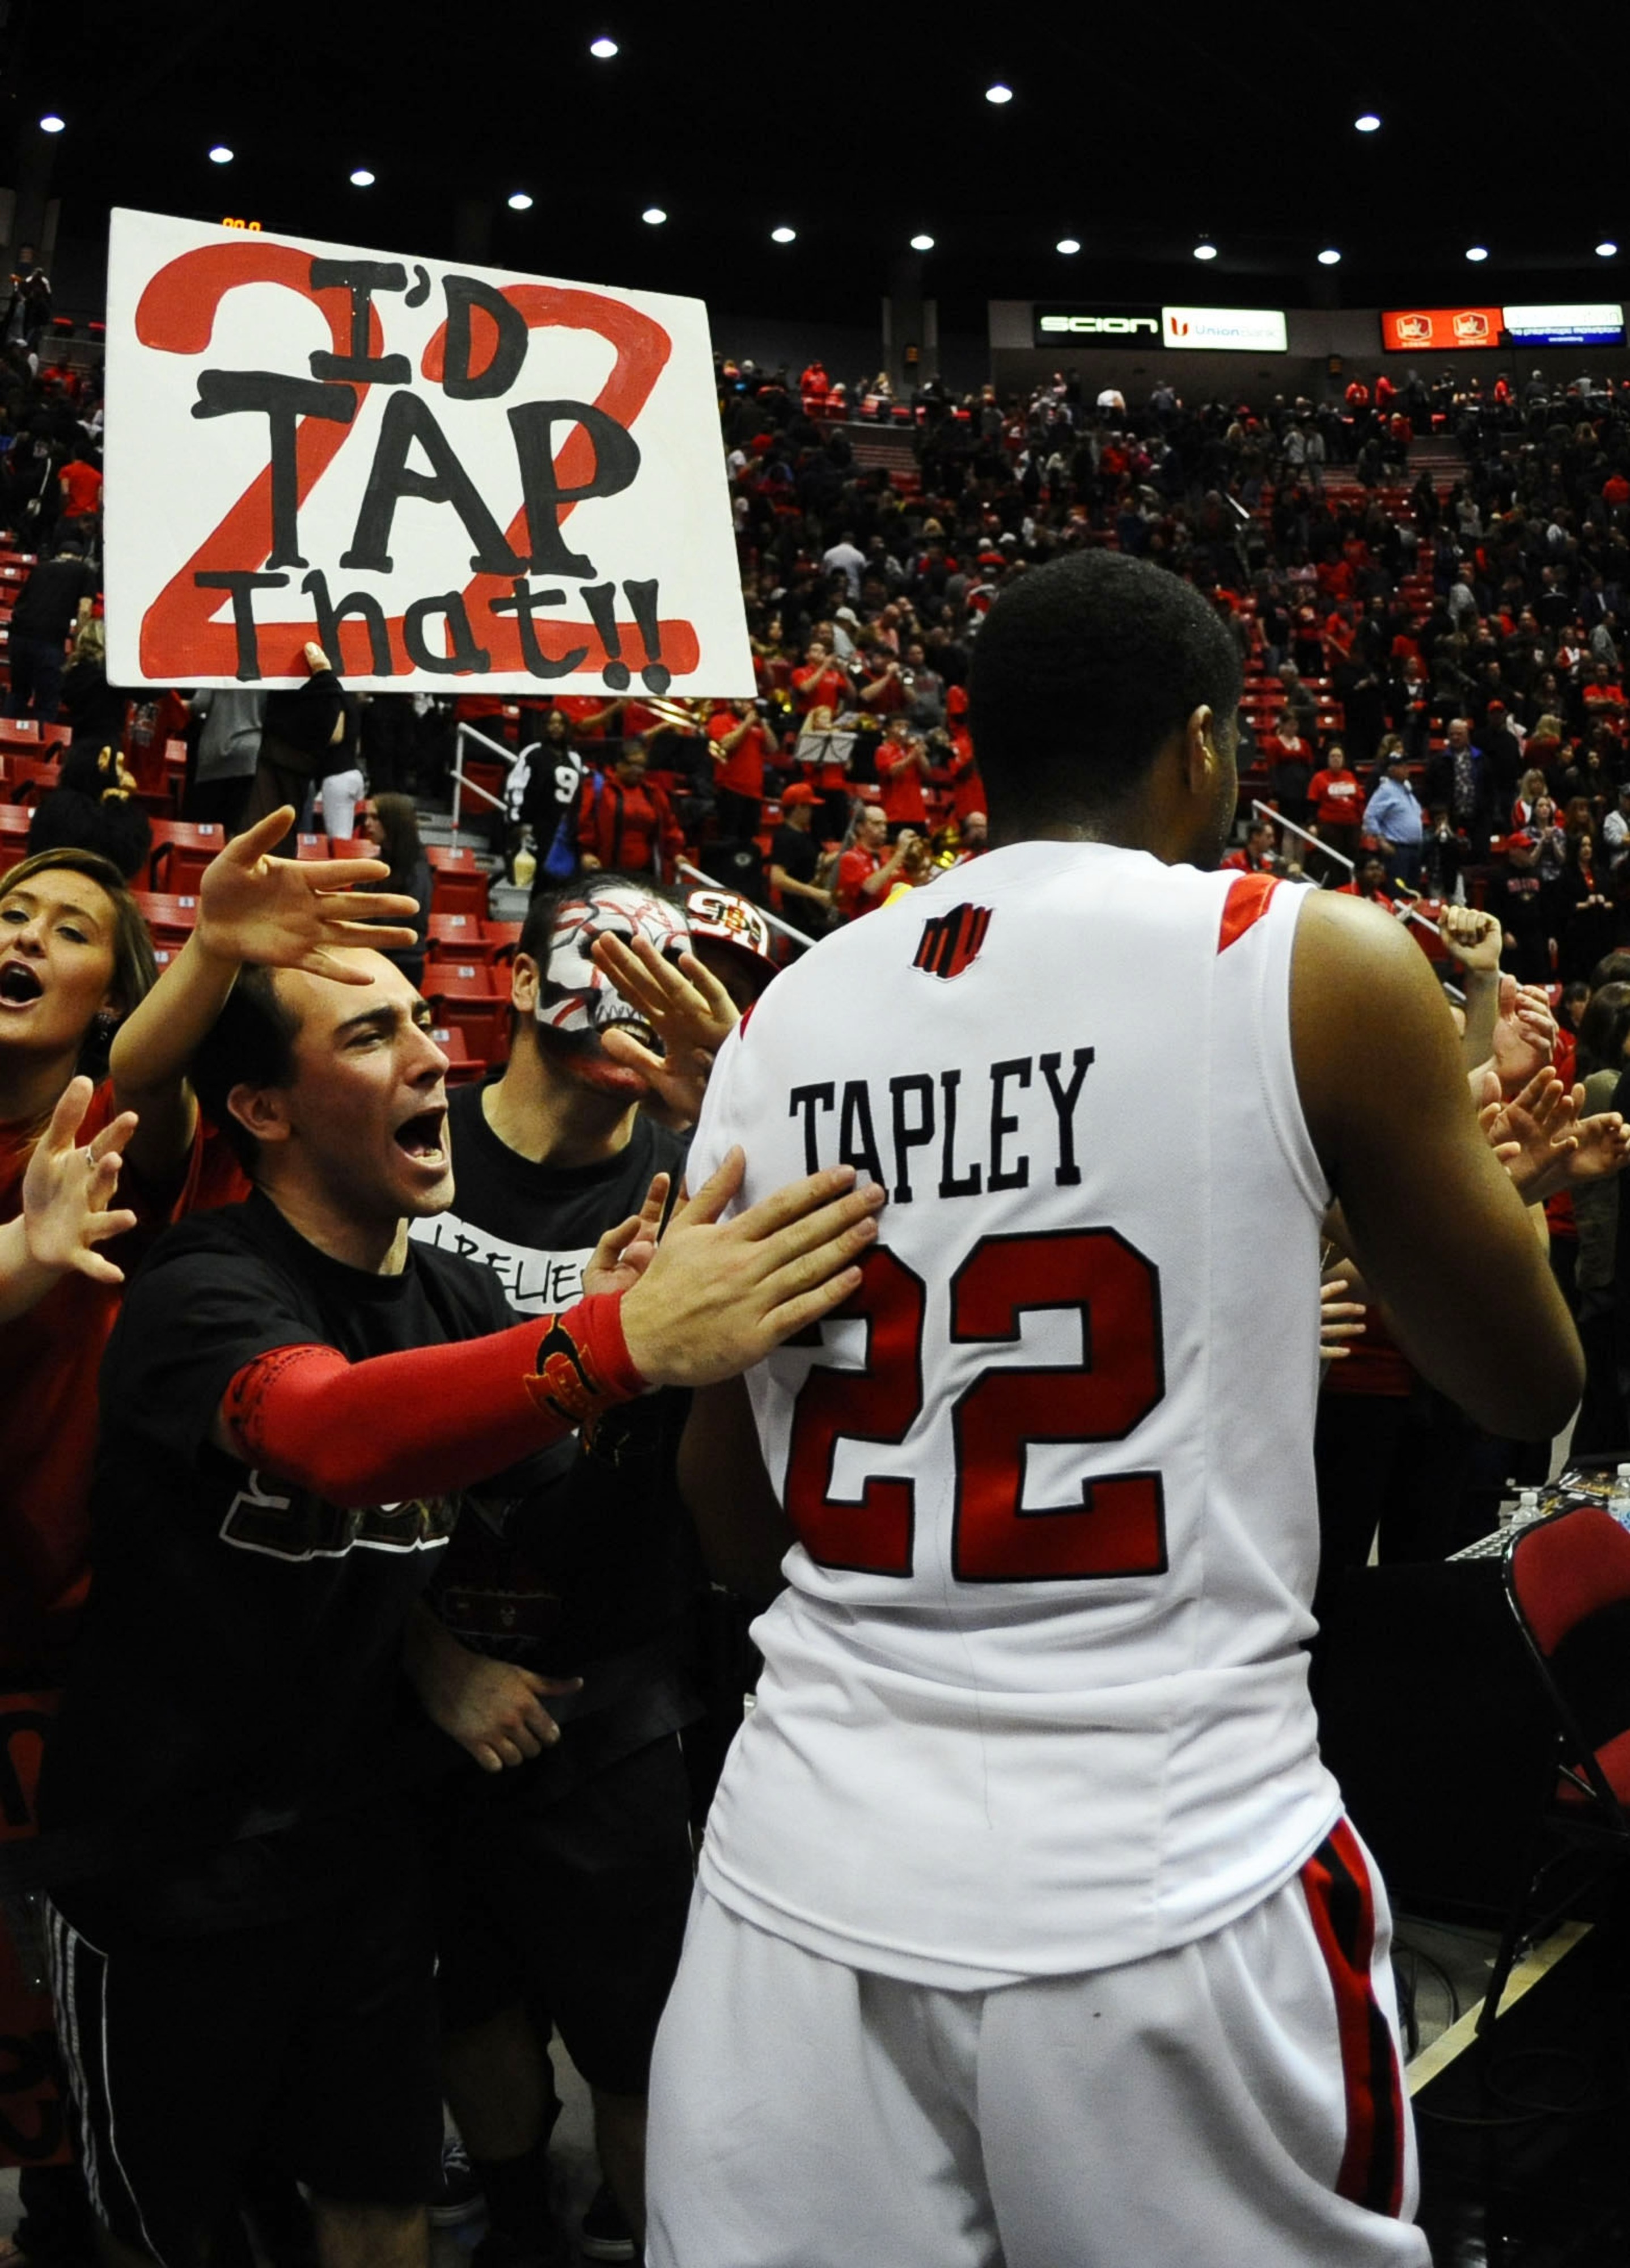 Fans love up SDSU's Chase Tapley after their win over CSU Saturday.